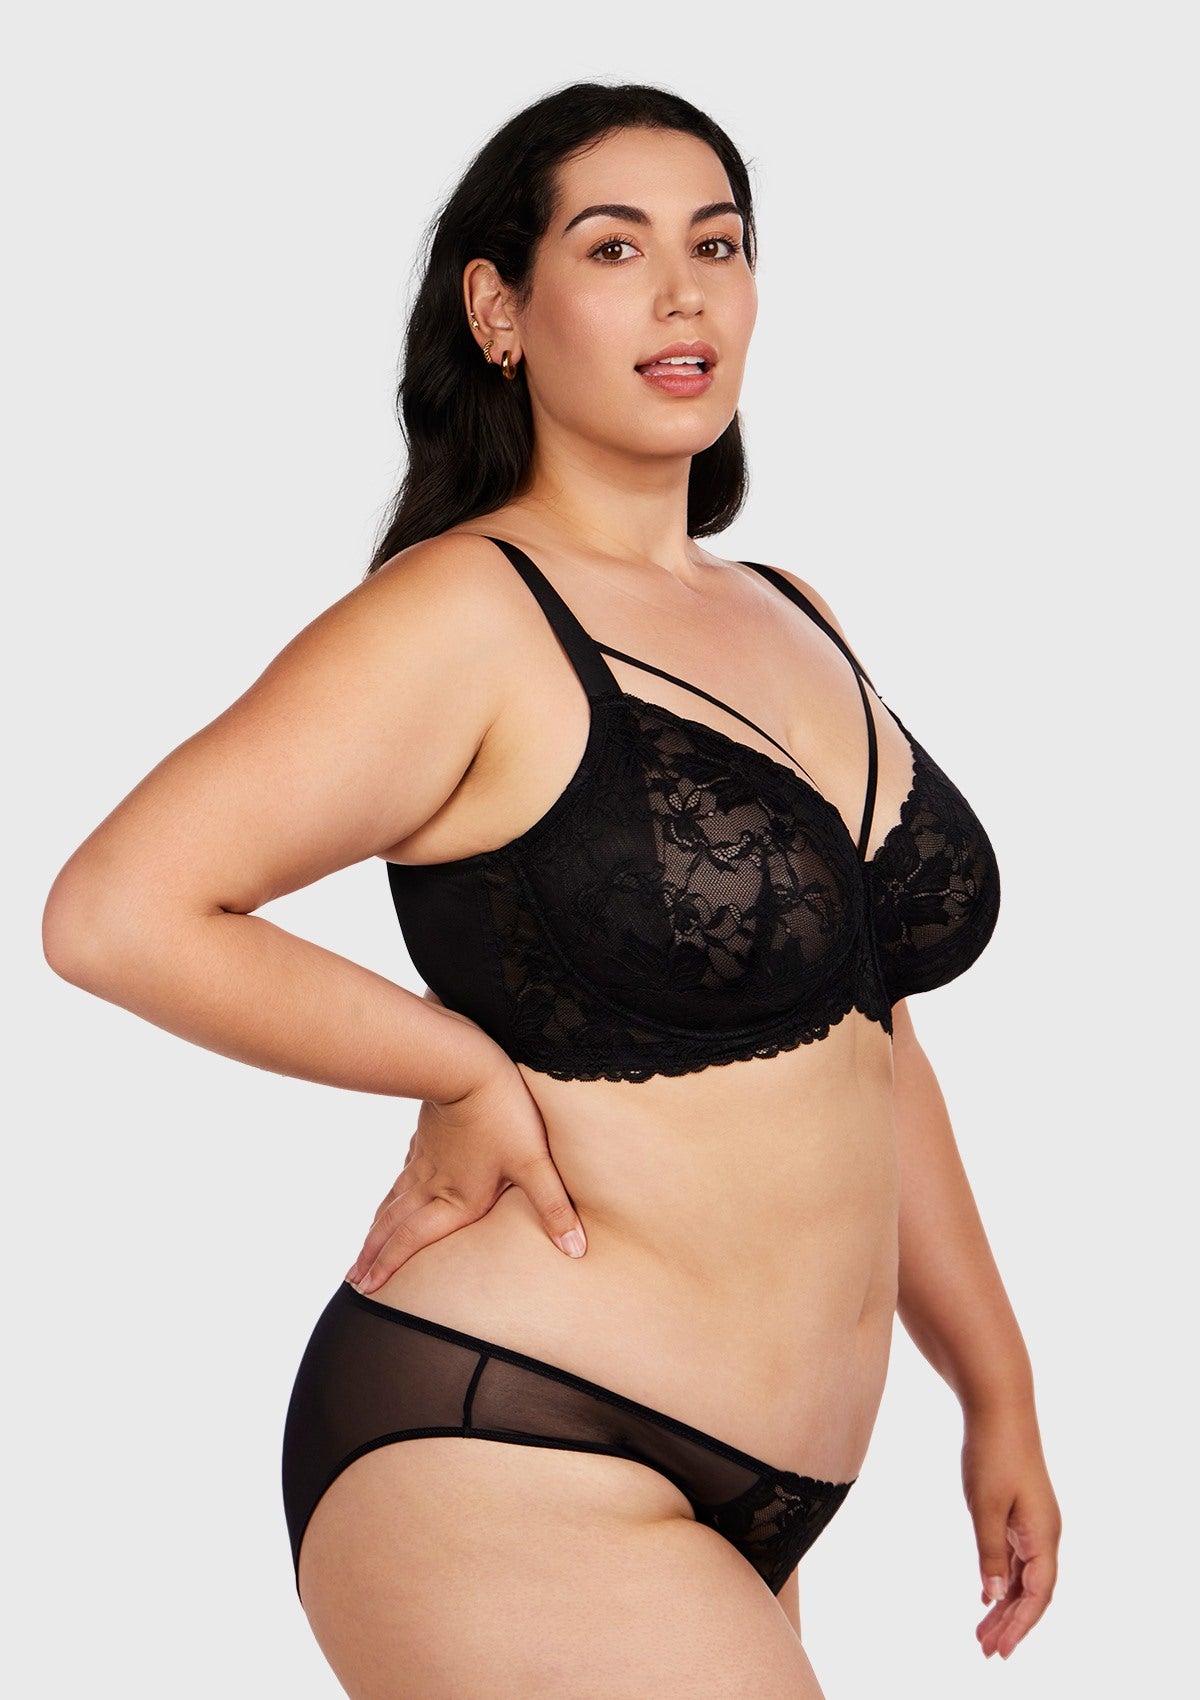 HSIA Pretty In Petals Bra - Plus Size Lingerie For Comfrot And Support - Black / 36 / G